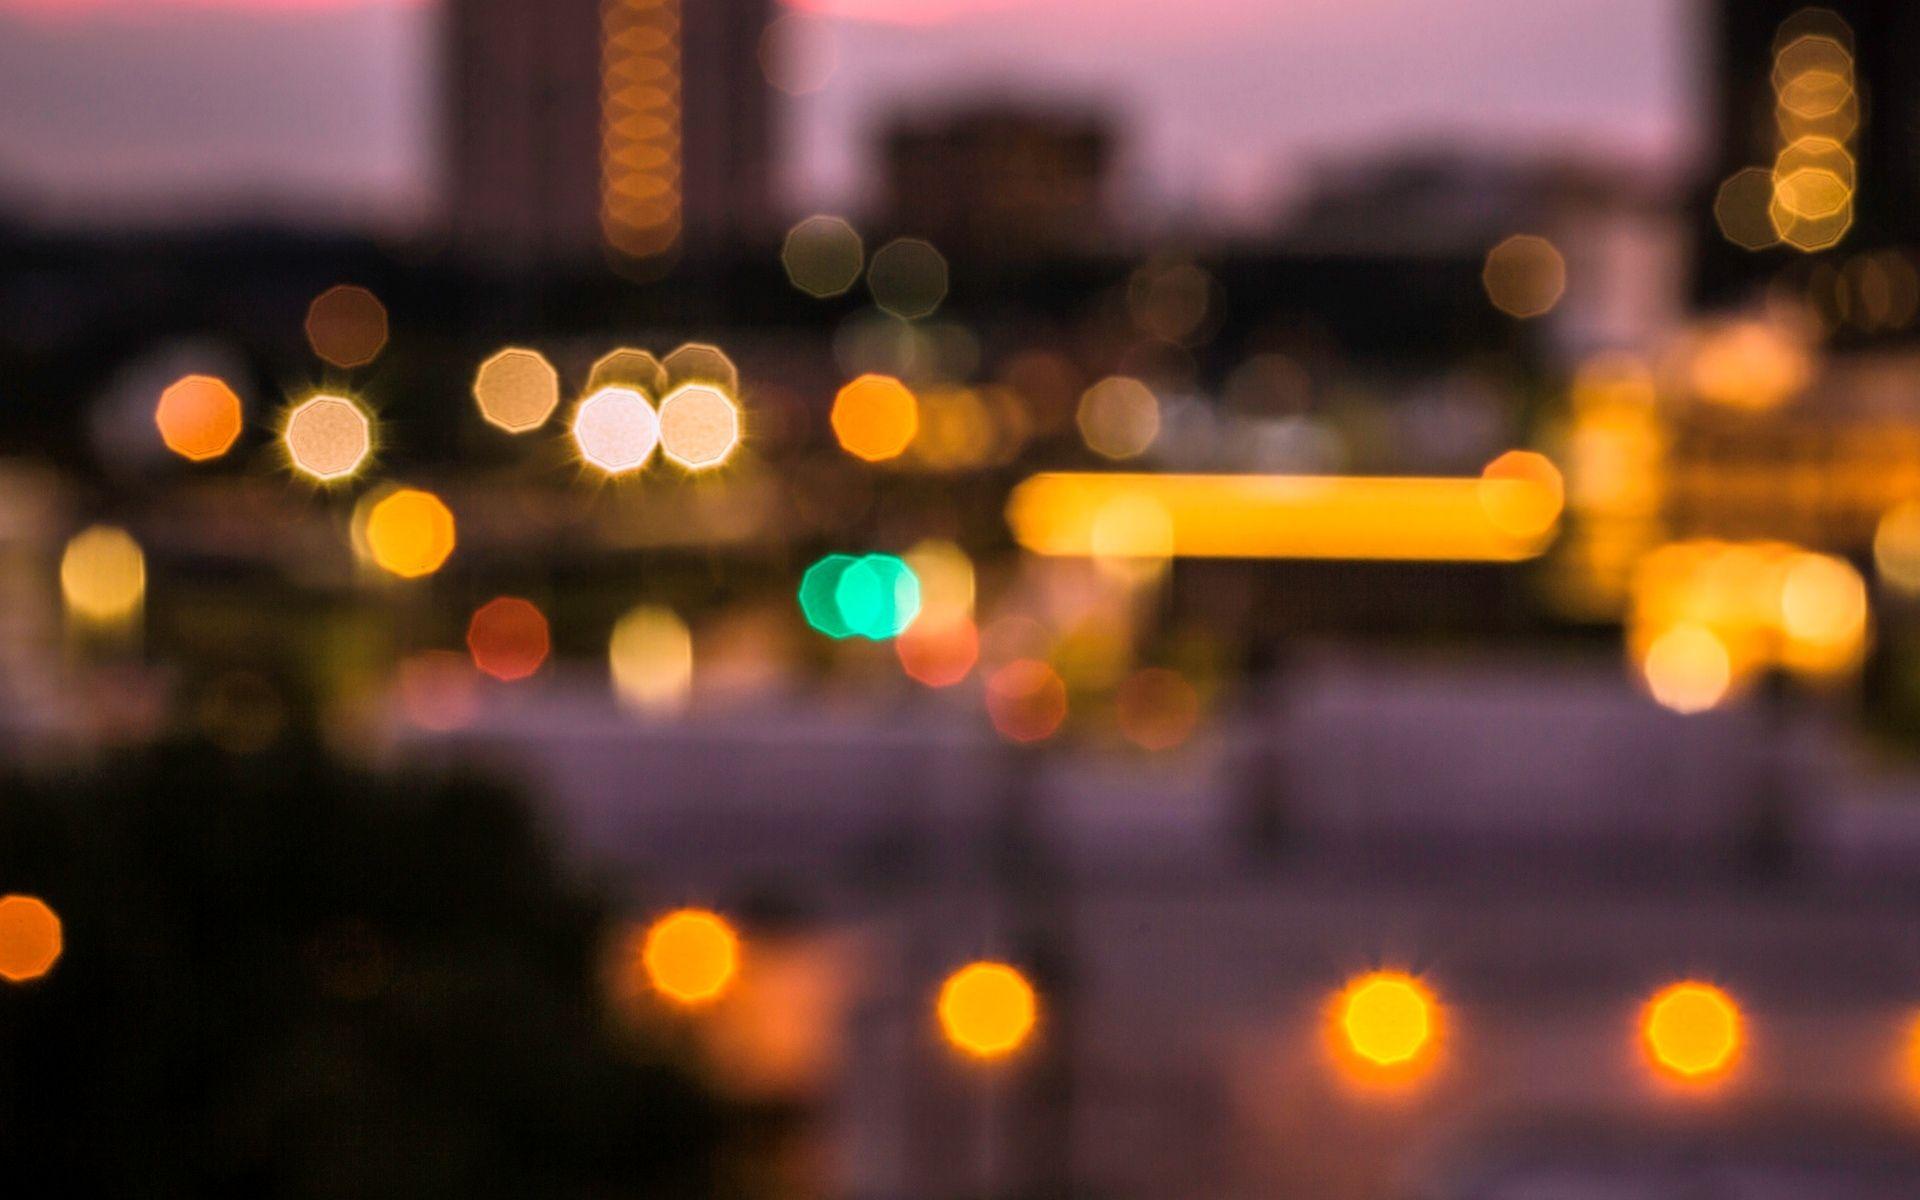 Beautiful Sunset City Bokeh Blurred Background Photo Defocused Abstract  CityBackground Out Of FocusCan Use As Wallpaper Or Background For Design  Summer Blurry City Backdrop Stock Photo Picture And Royalty Free Image  Image